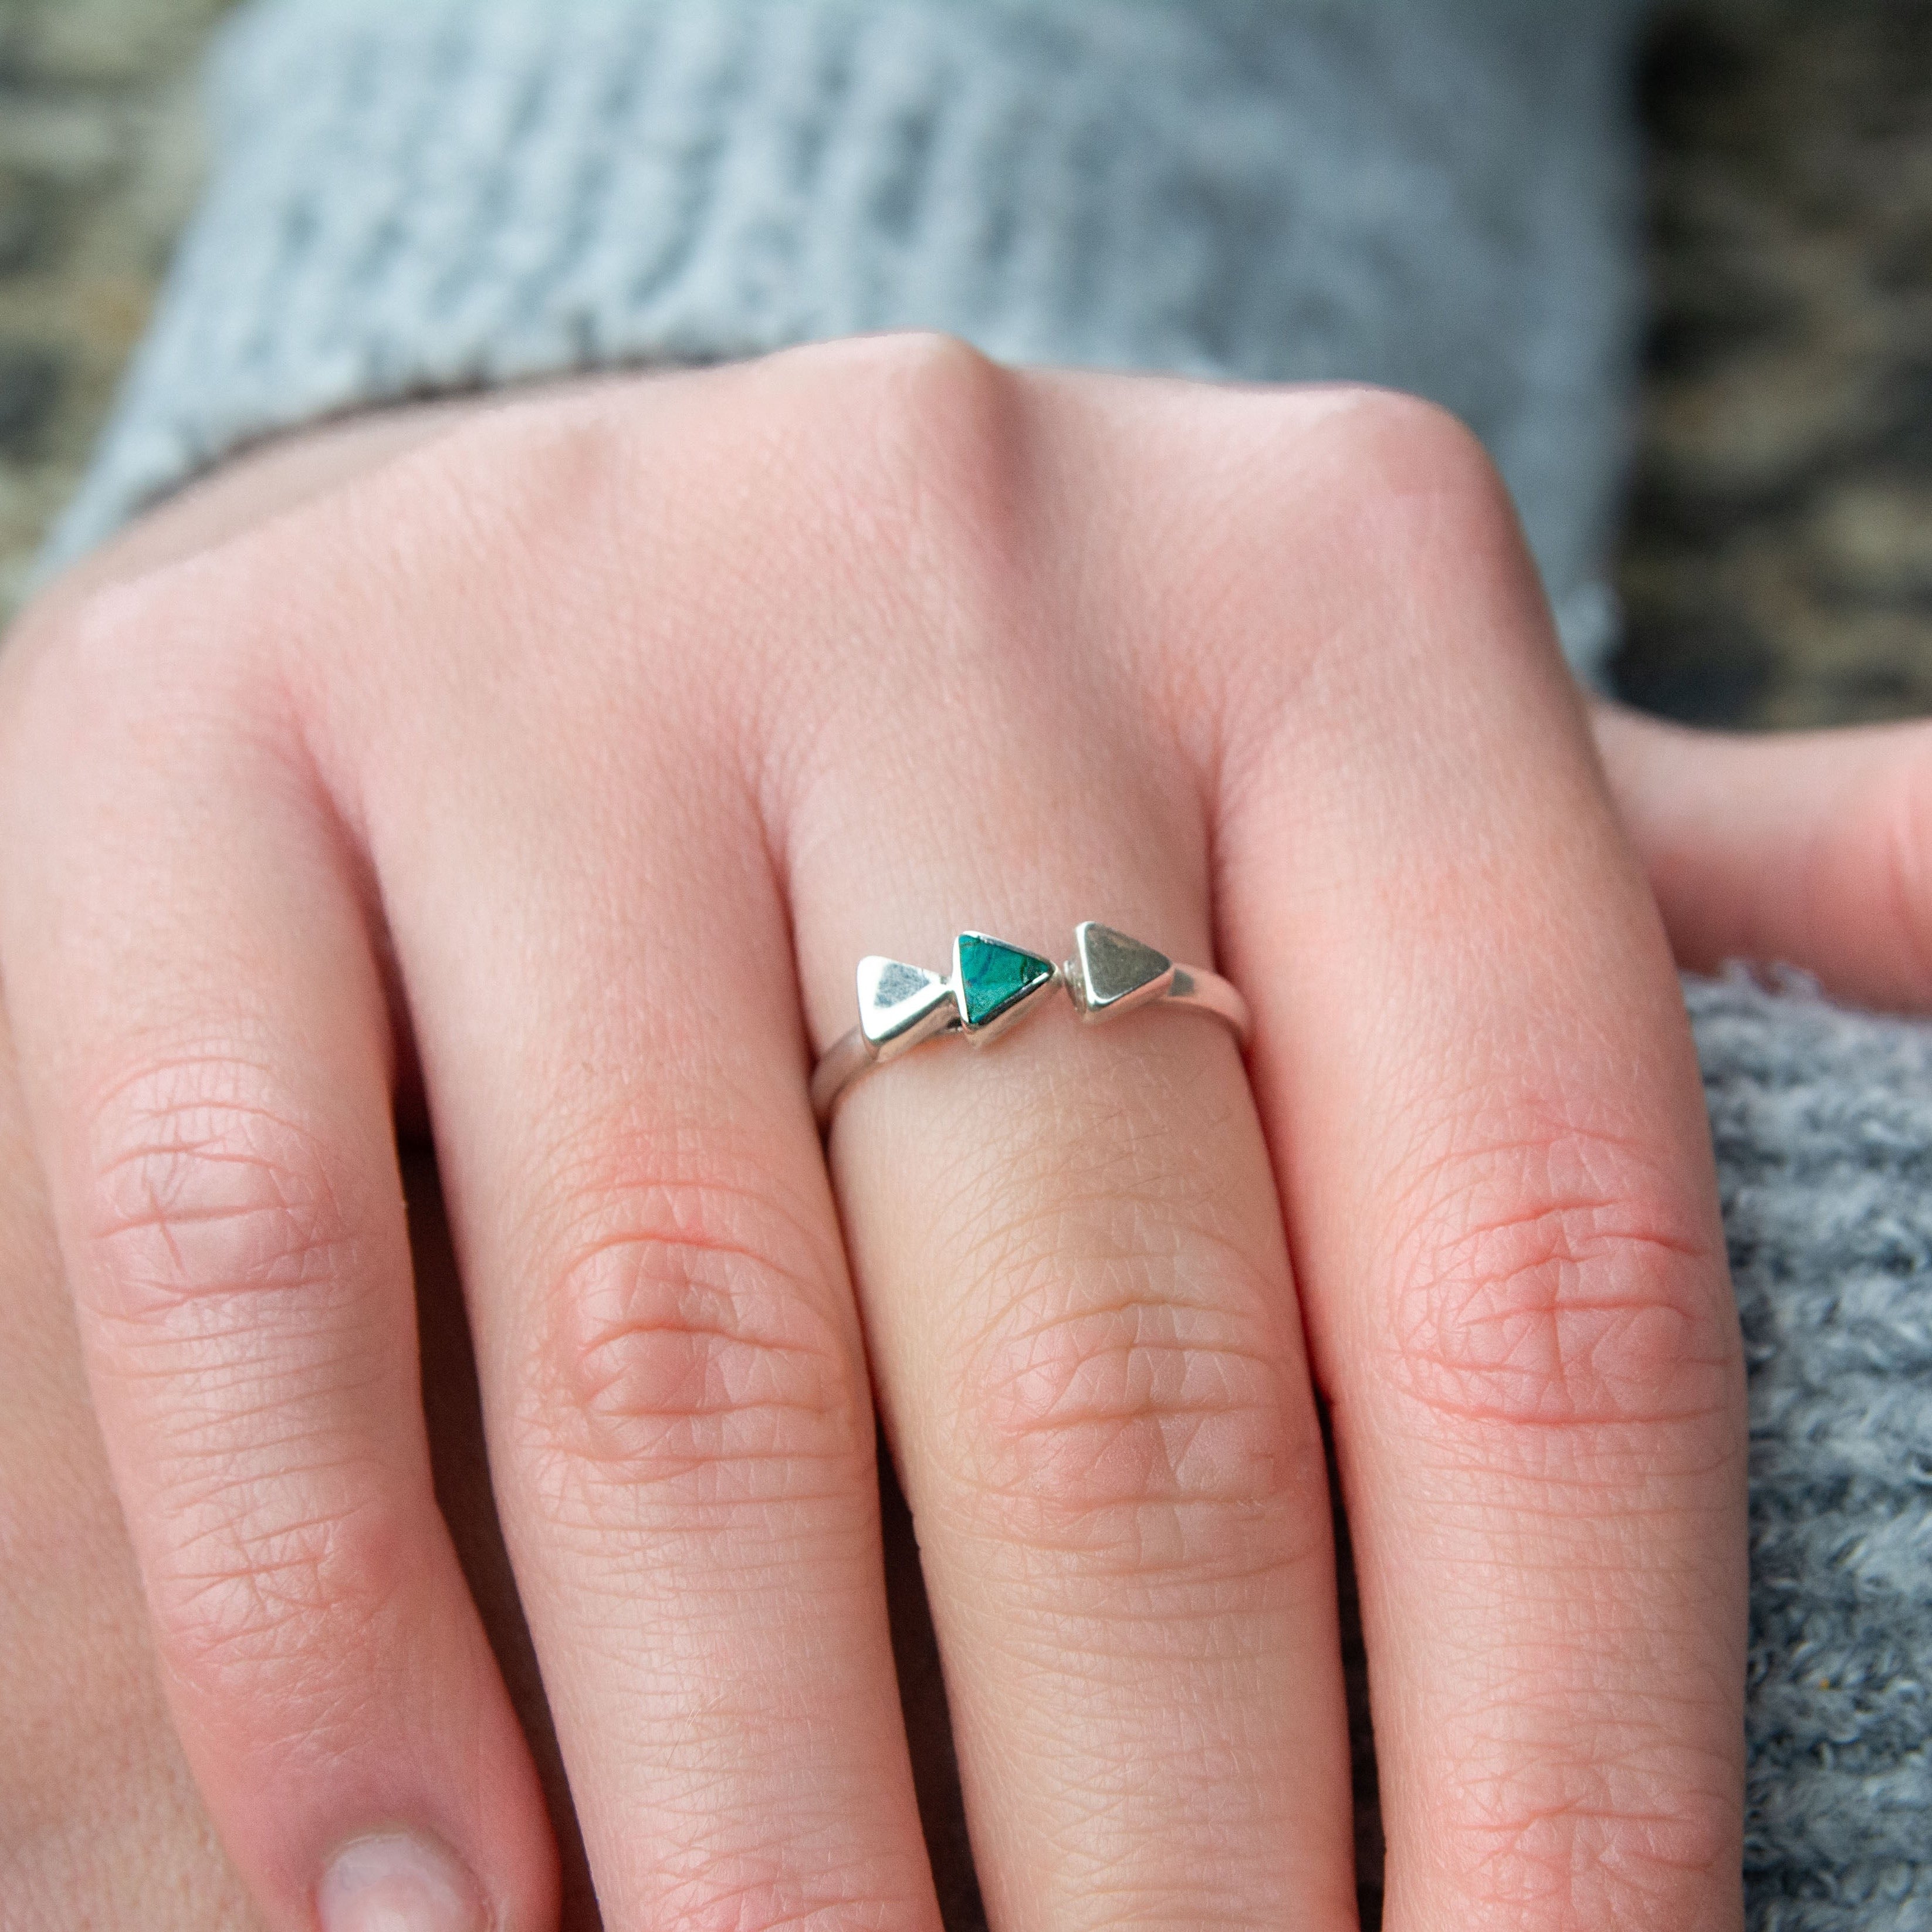 Three triangles Chrysocholla and silver 950 adjustable ring